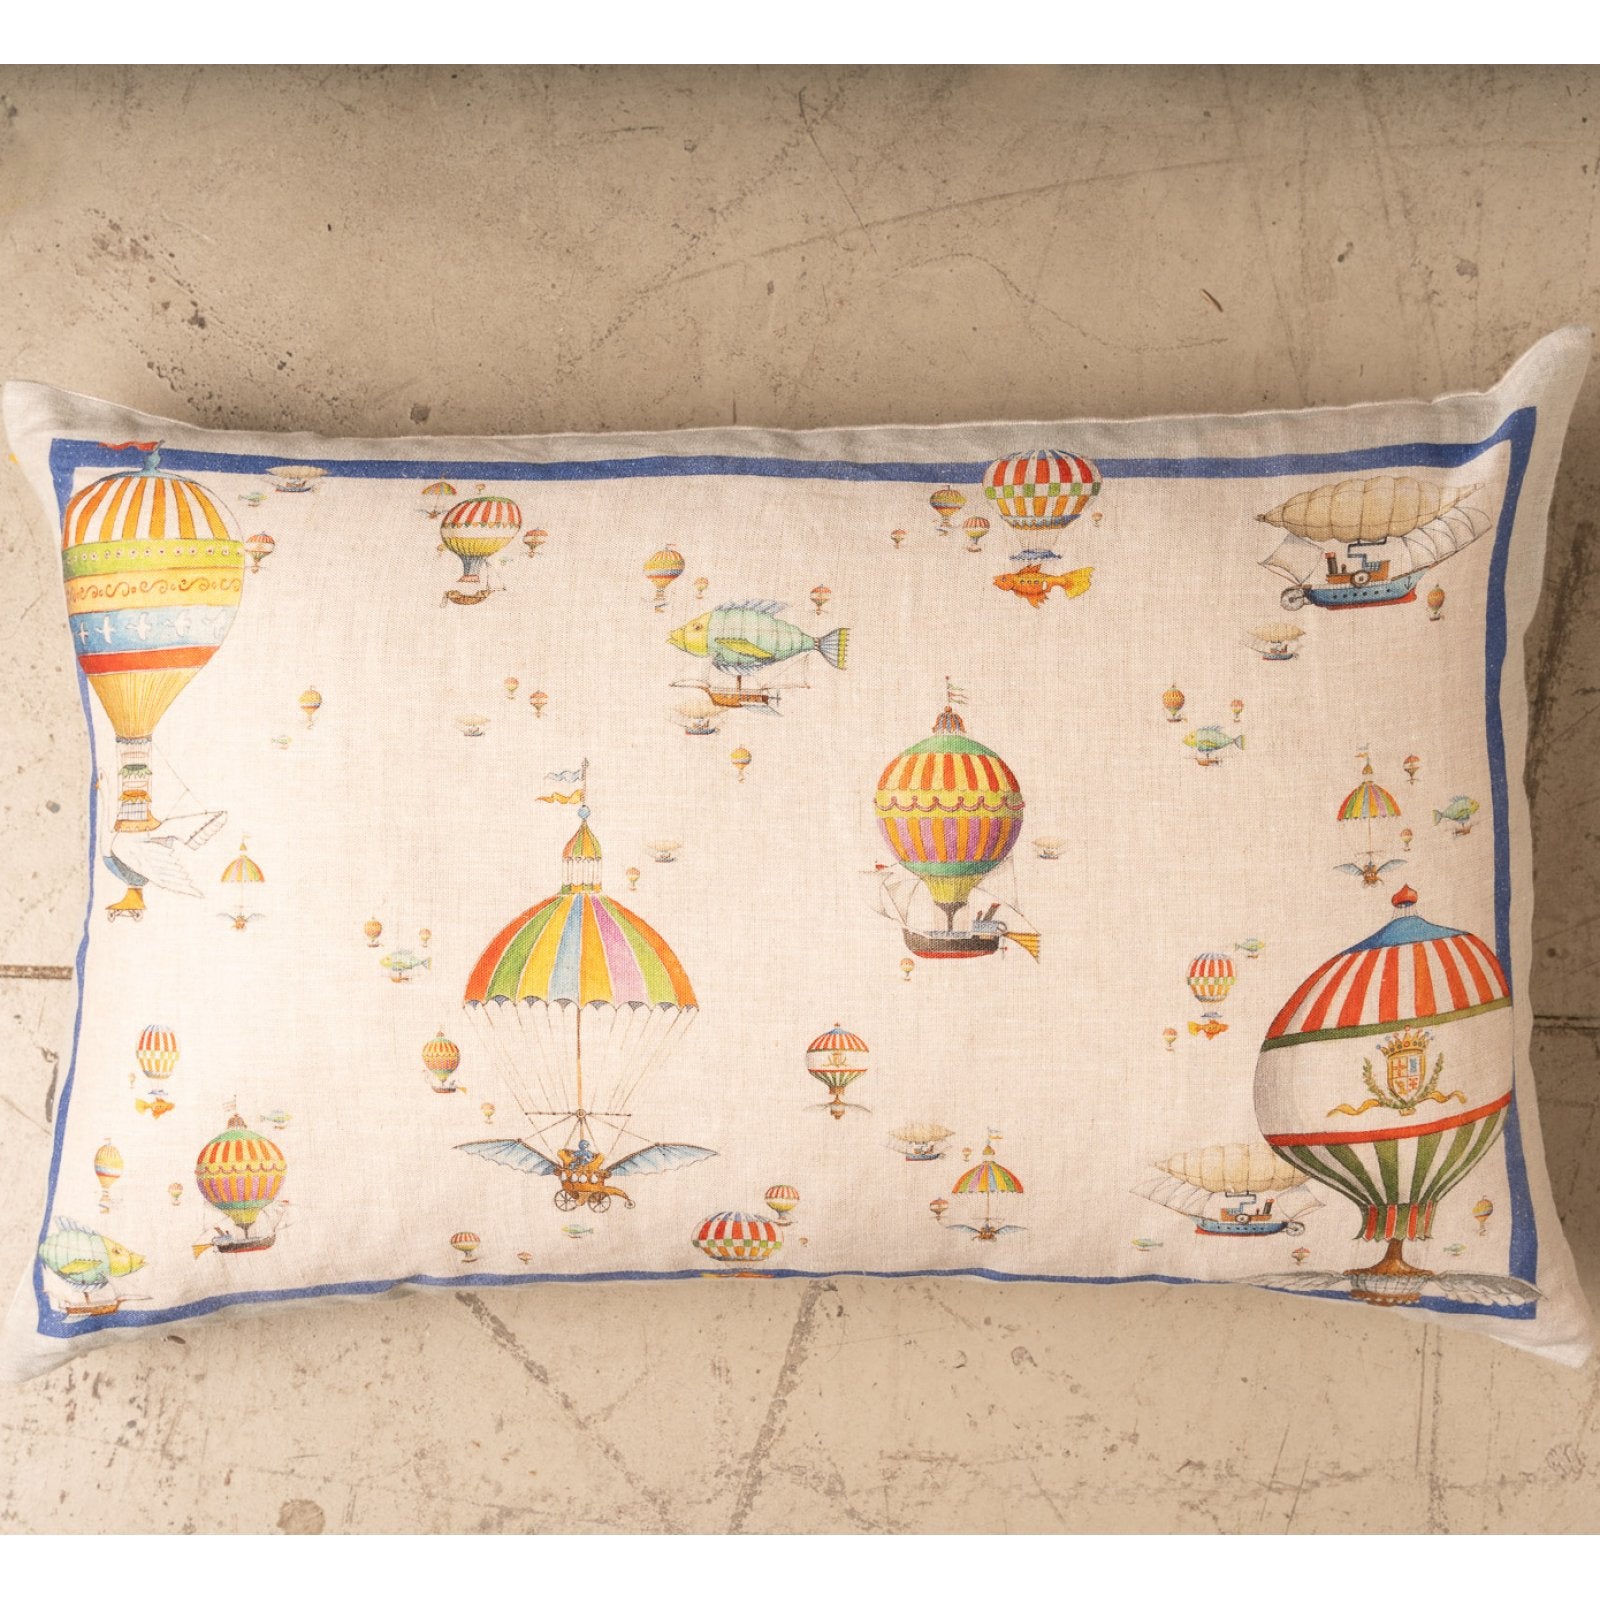 Tessitura Toscana Telerie, “Flyby”, Printed rectangular linen cushion cover.